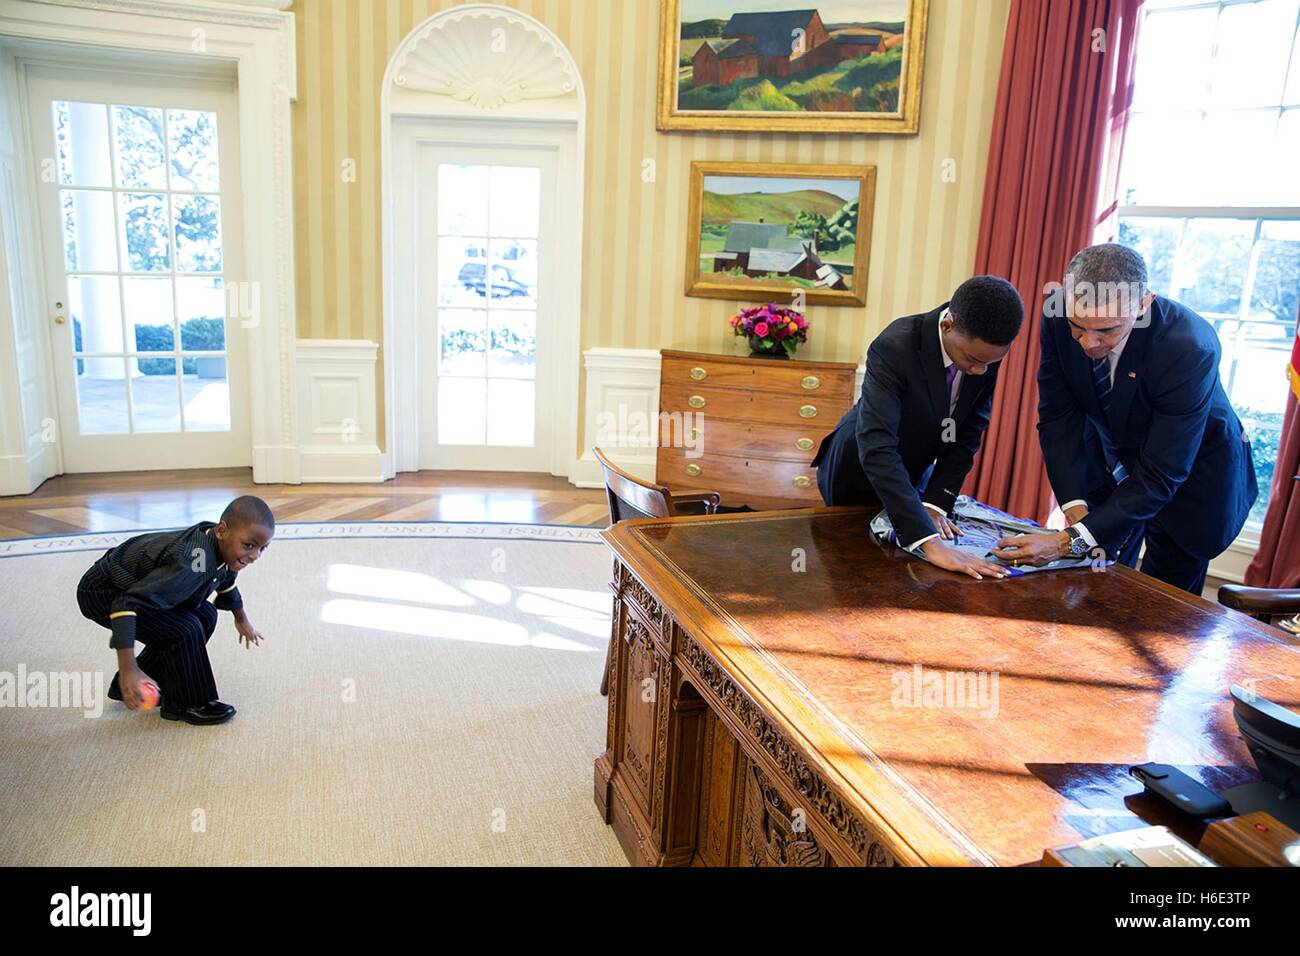 U.S. President Barack Obama signs a poster for 13-year-old student Vidal Chastanet after their Humans of New York blog interview in the White House Oval Office February 5, 2015 in Washington, DC. Stock Photo